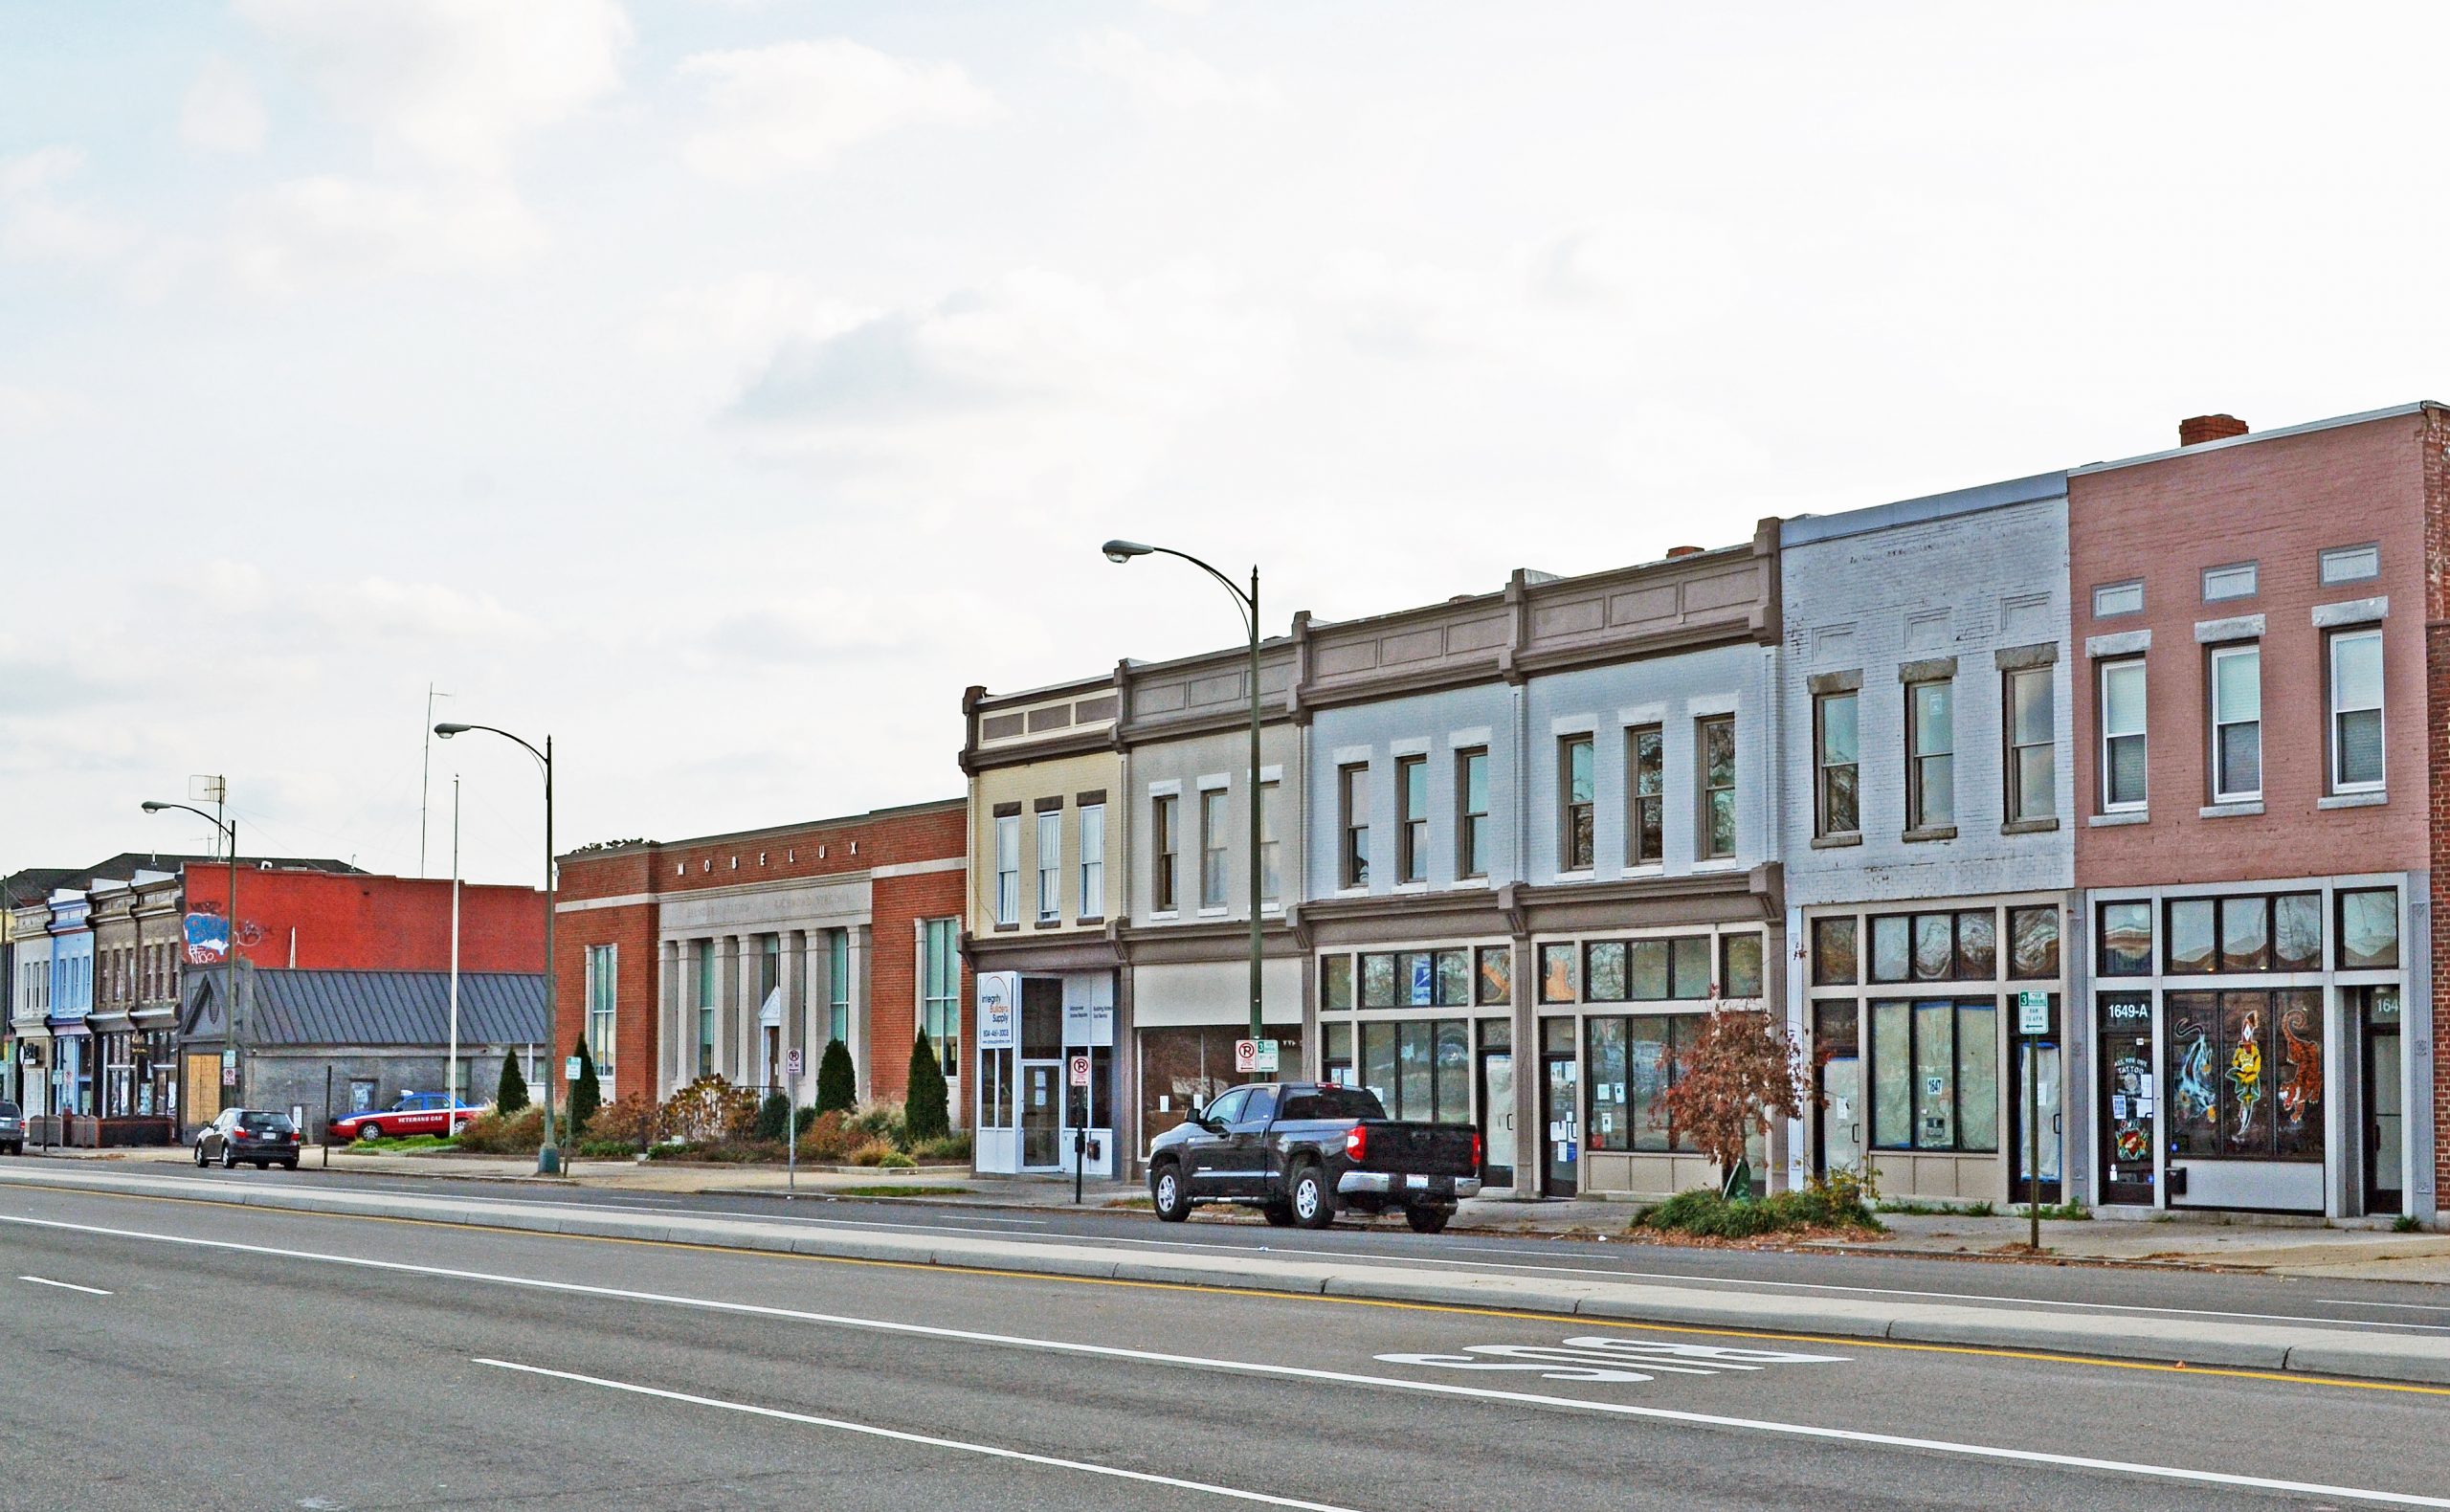 127-5807_West_Broad_St_Commercial_HD_2020_streetscape_VLR_Online-scaled